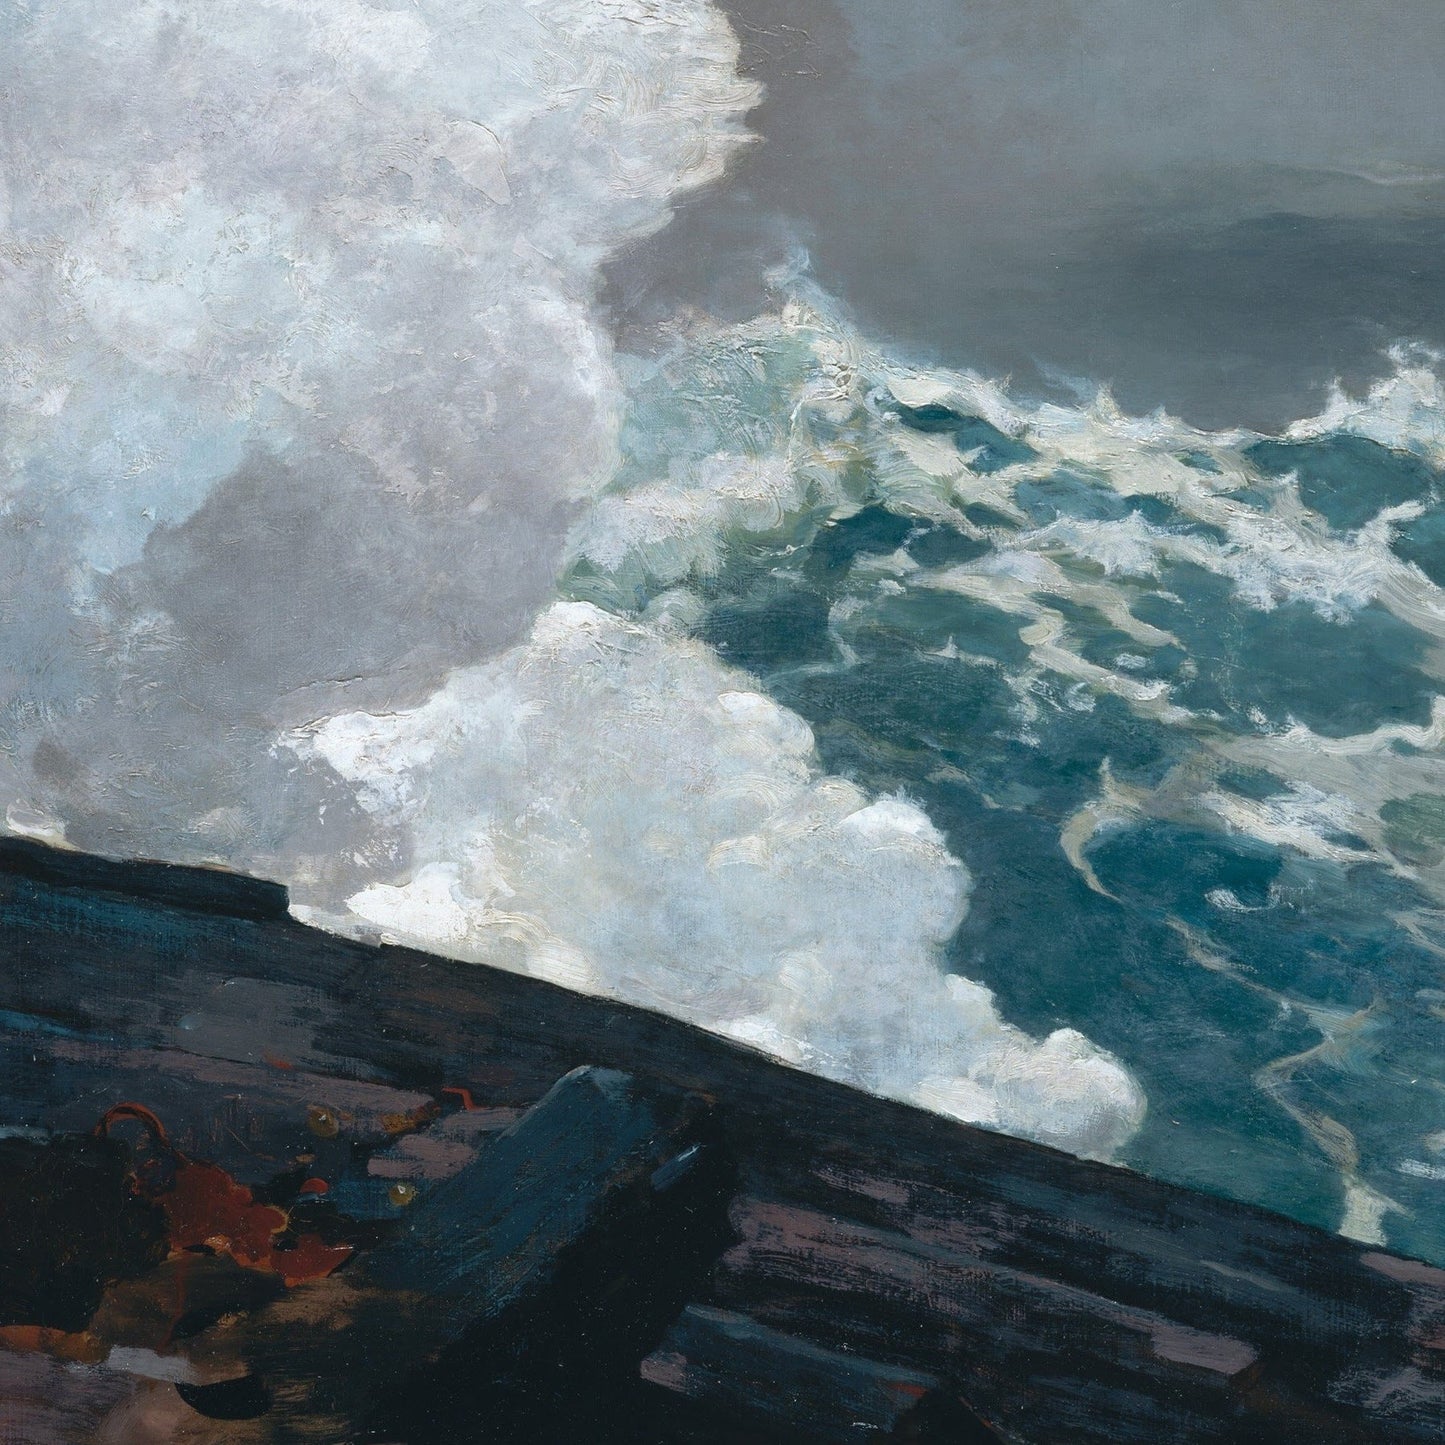 Northeaster by Winslow Homer, 3d Printed with texture and brush strokes looks like original oil-painting, code:212